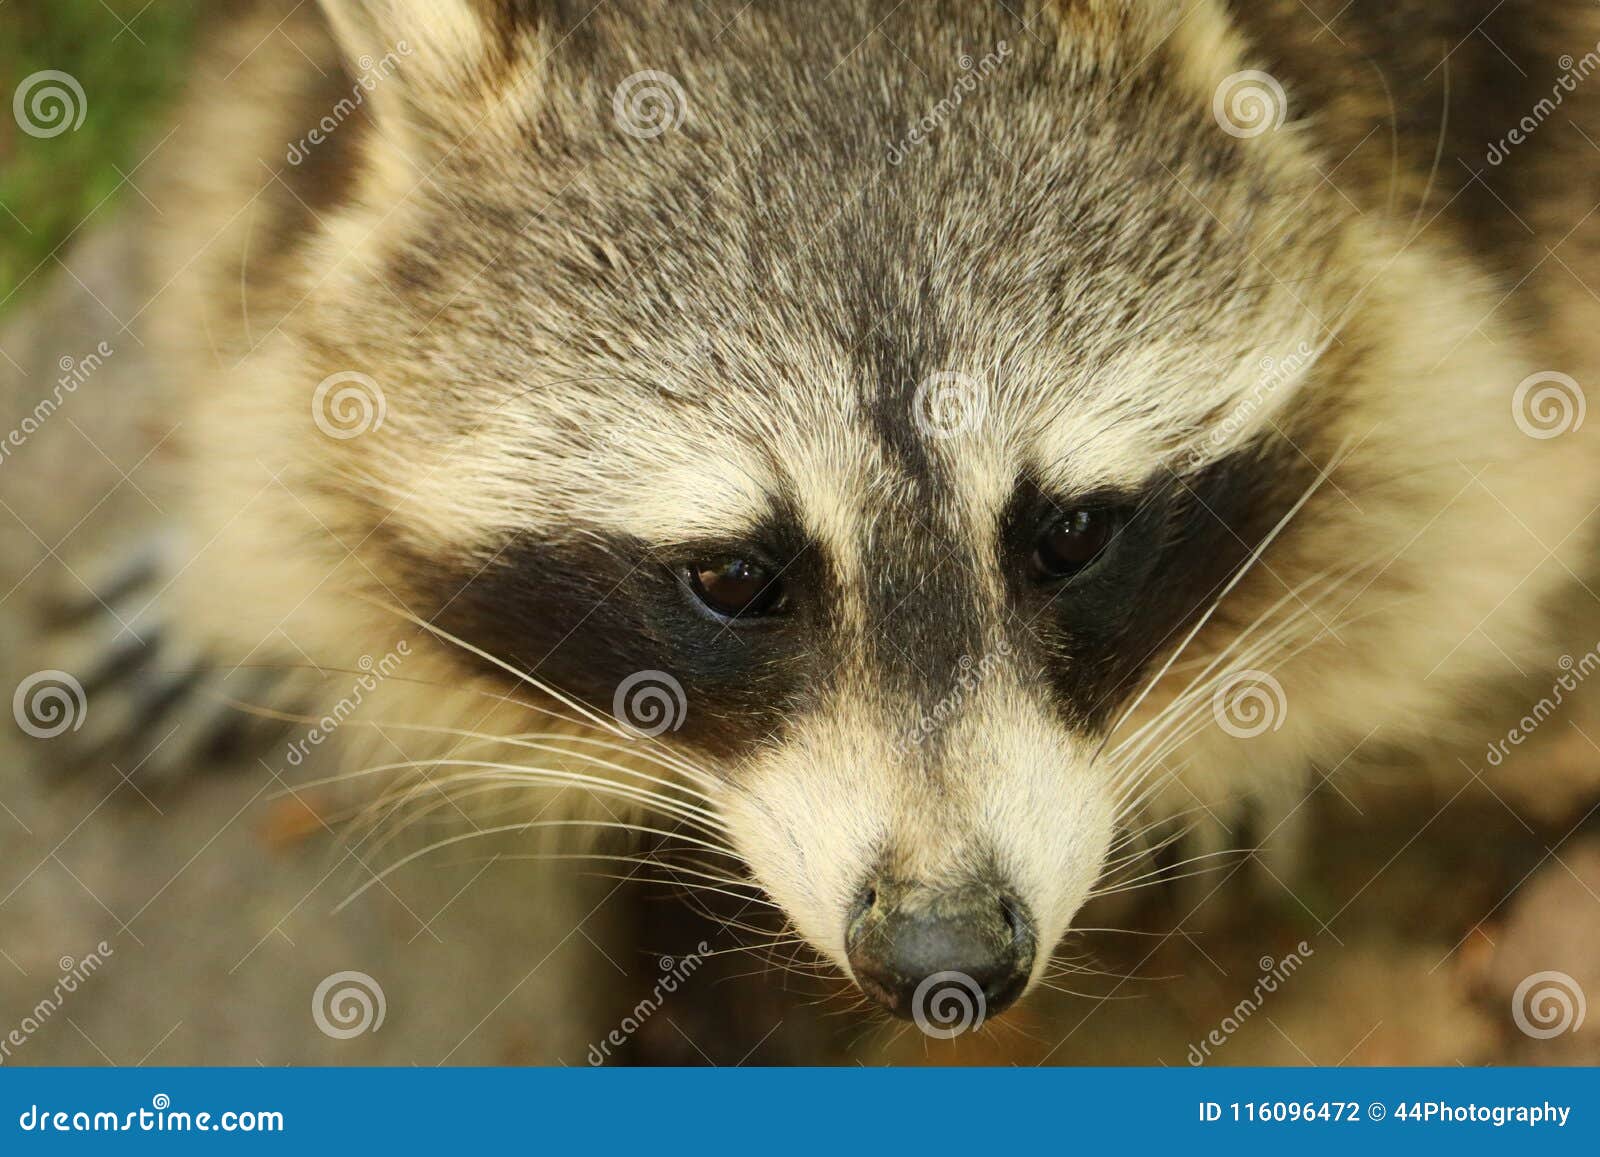 closeup portrait of raccon, wild animal in north america and europe